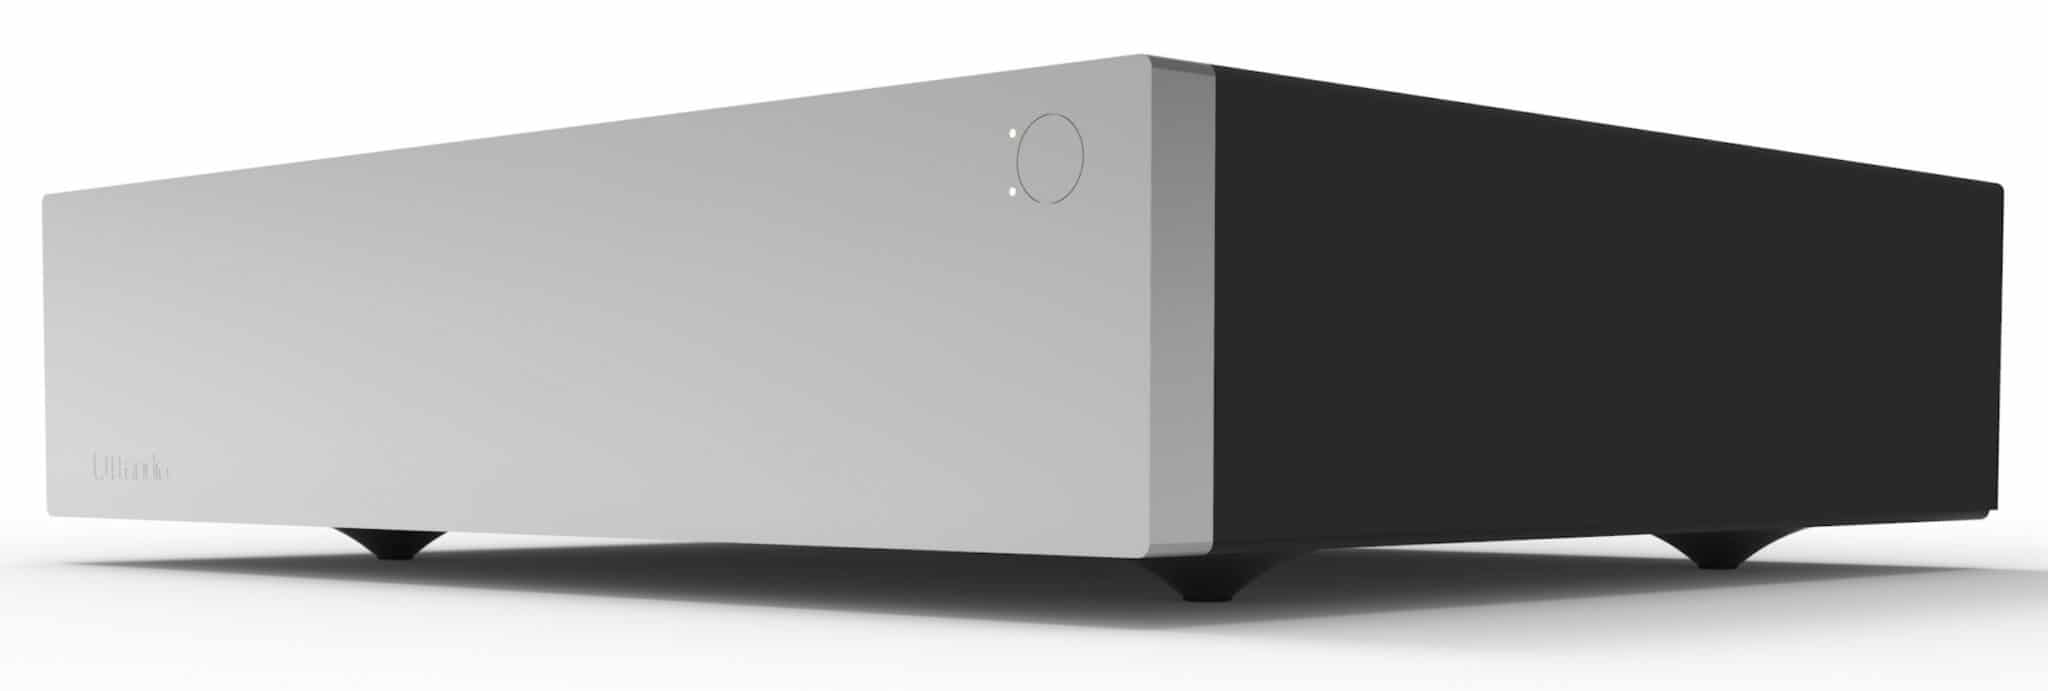 B.amp Power Amplifier From B.audio 